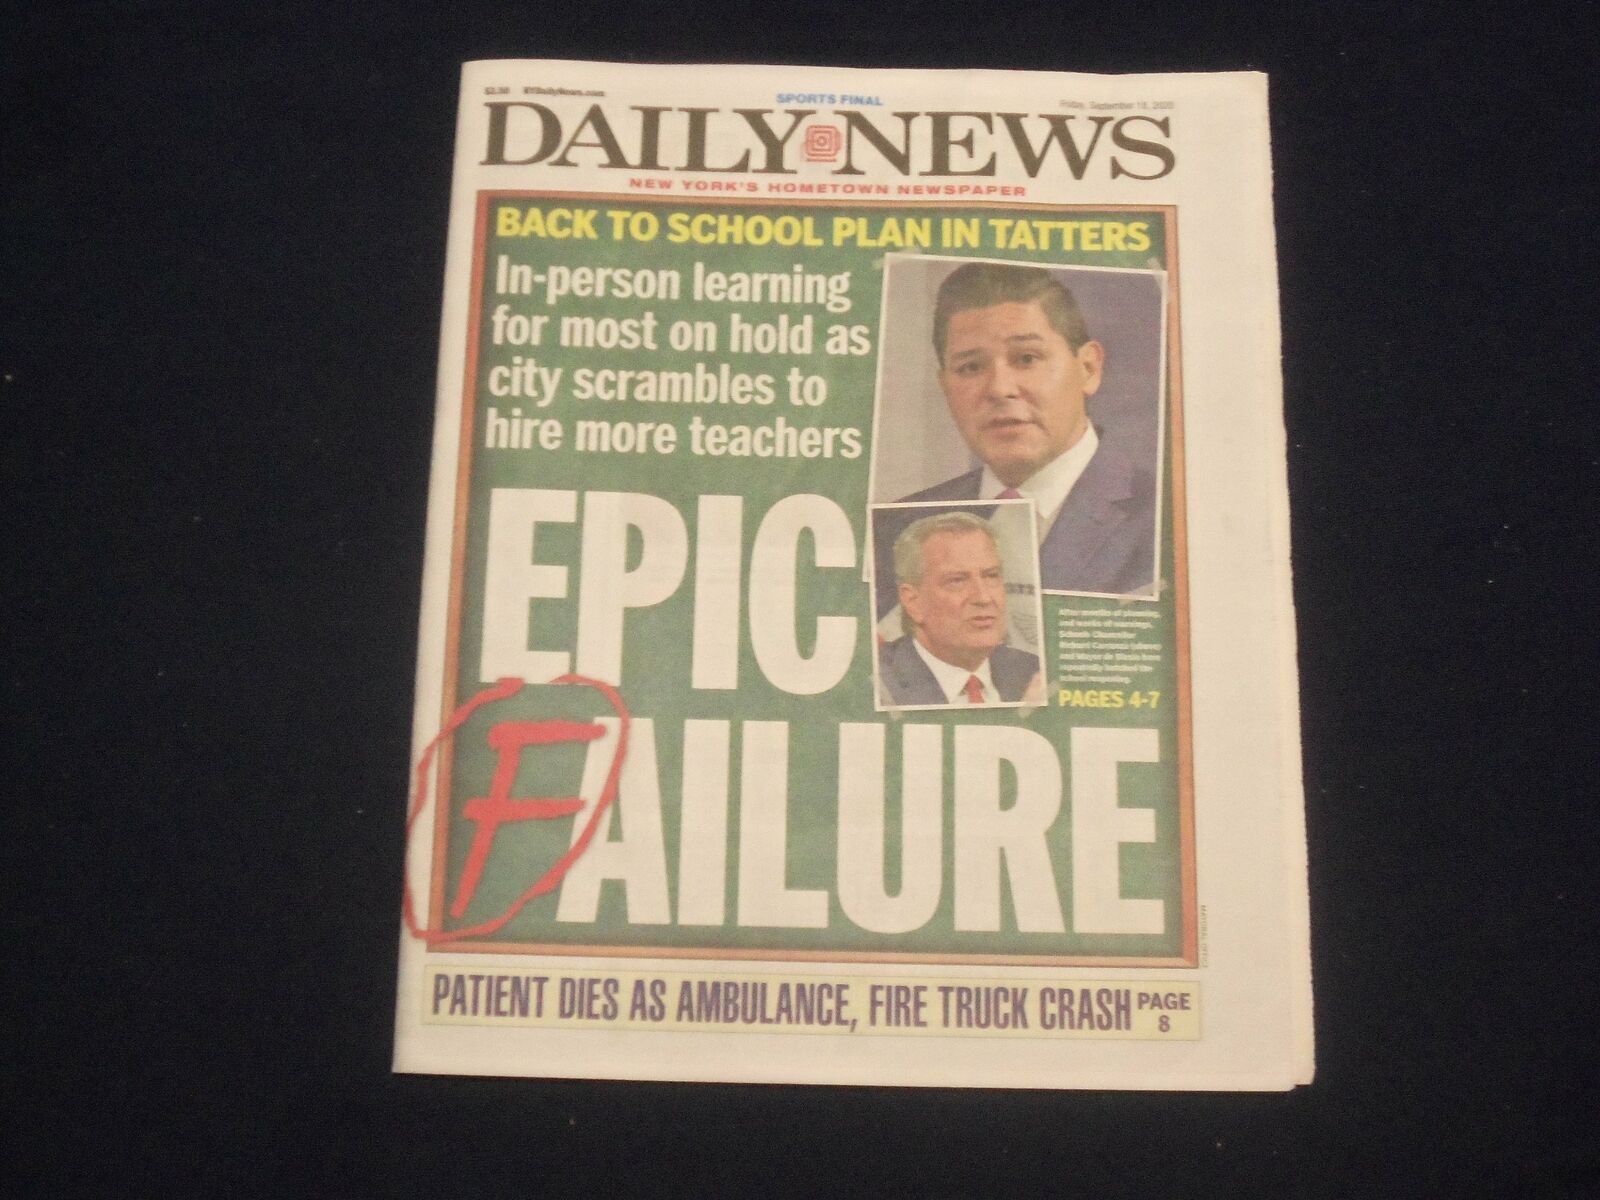 2020 SEPTEMBER 18 NEW YORK DAILY NEWS NEWSPAPER - NYC SCHOOLS TO BE VIRTUAL